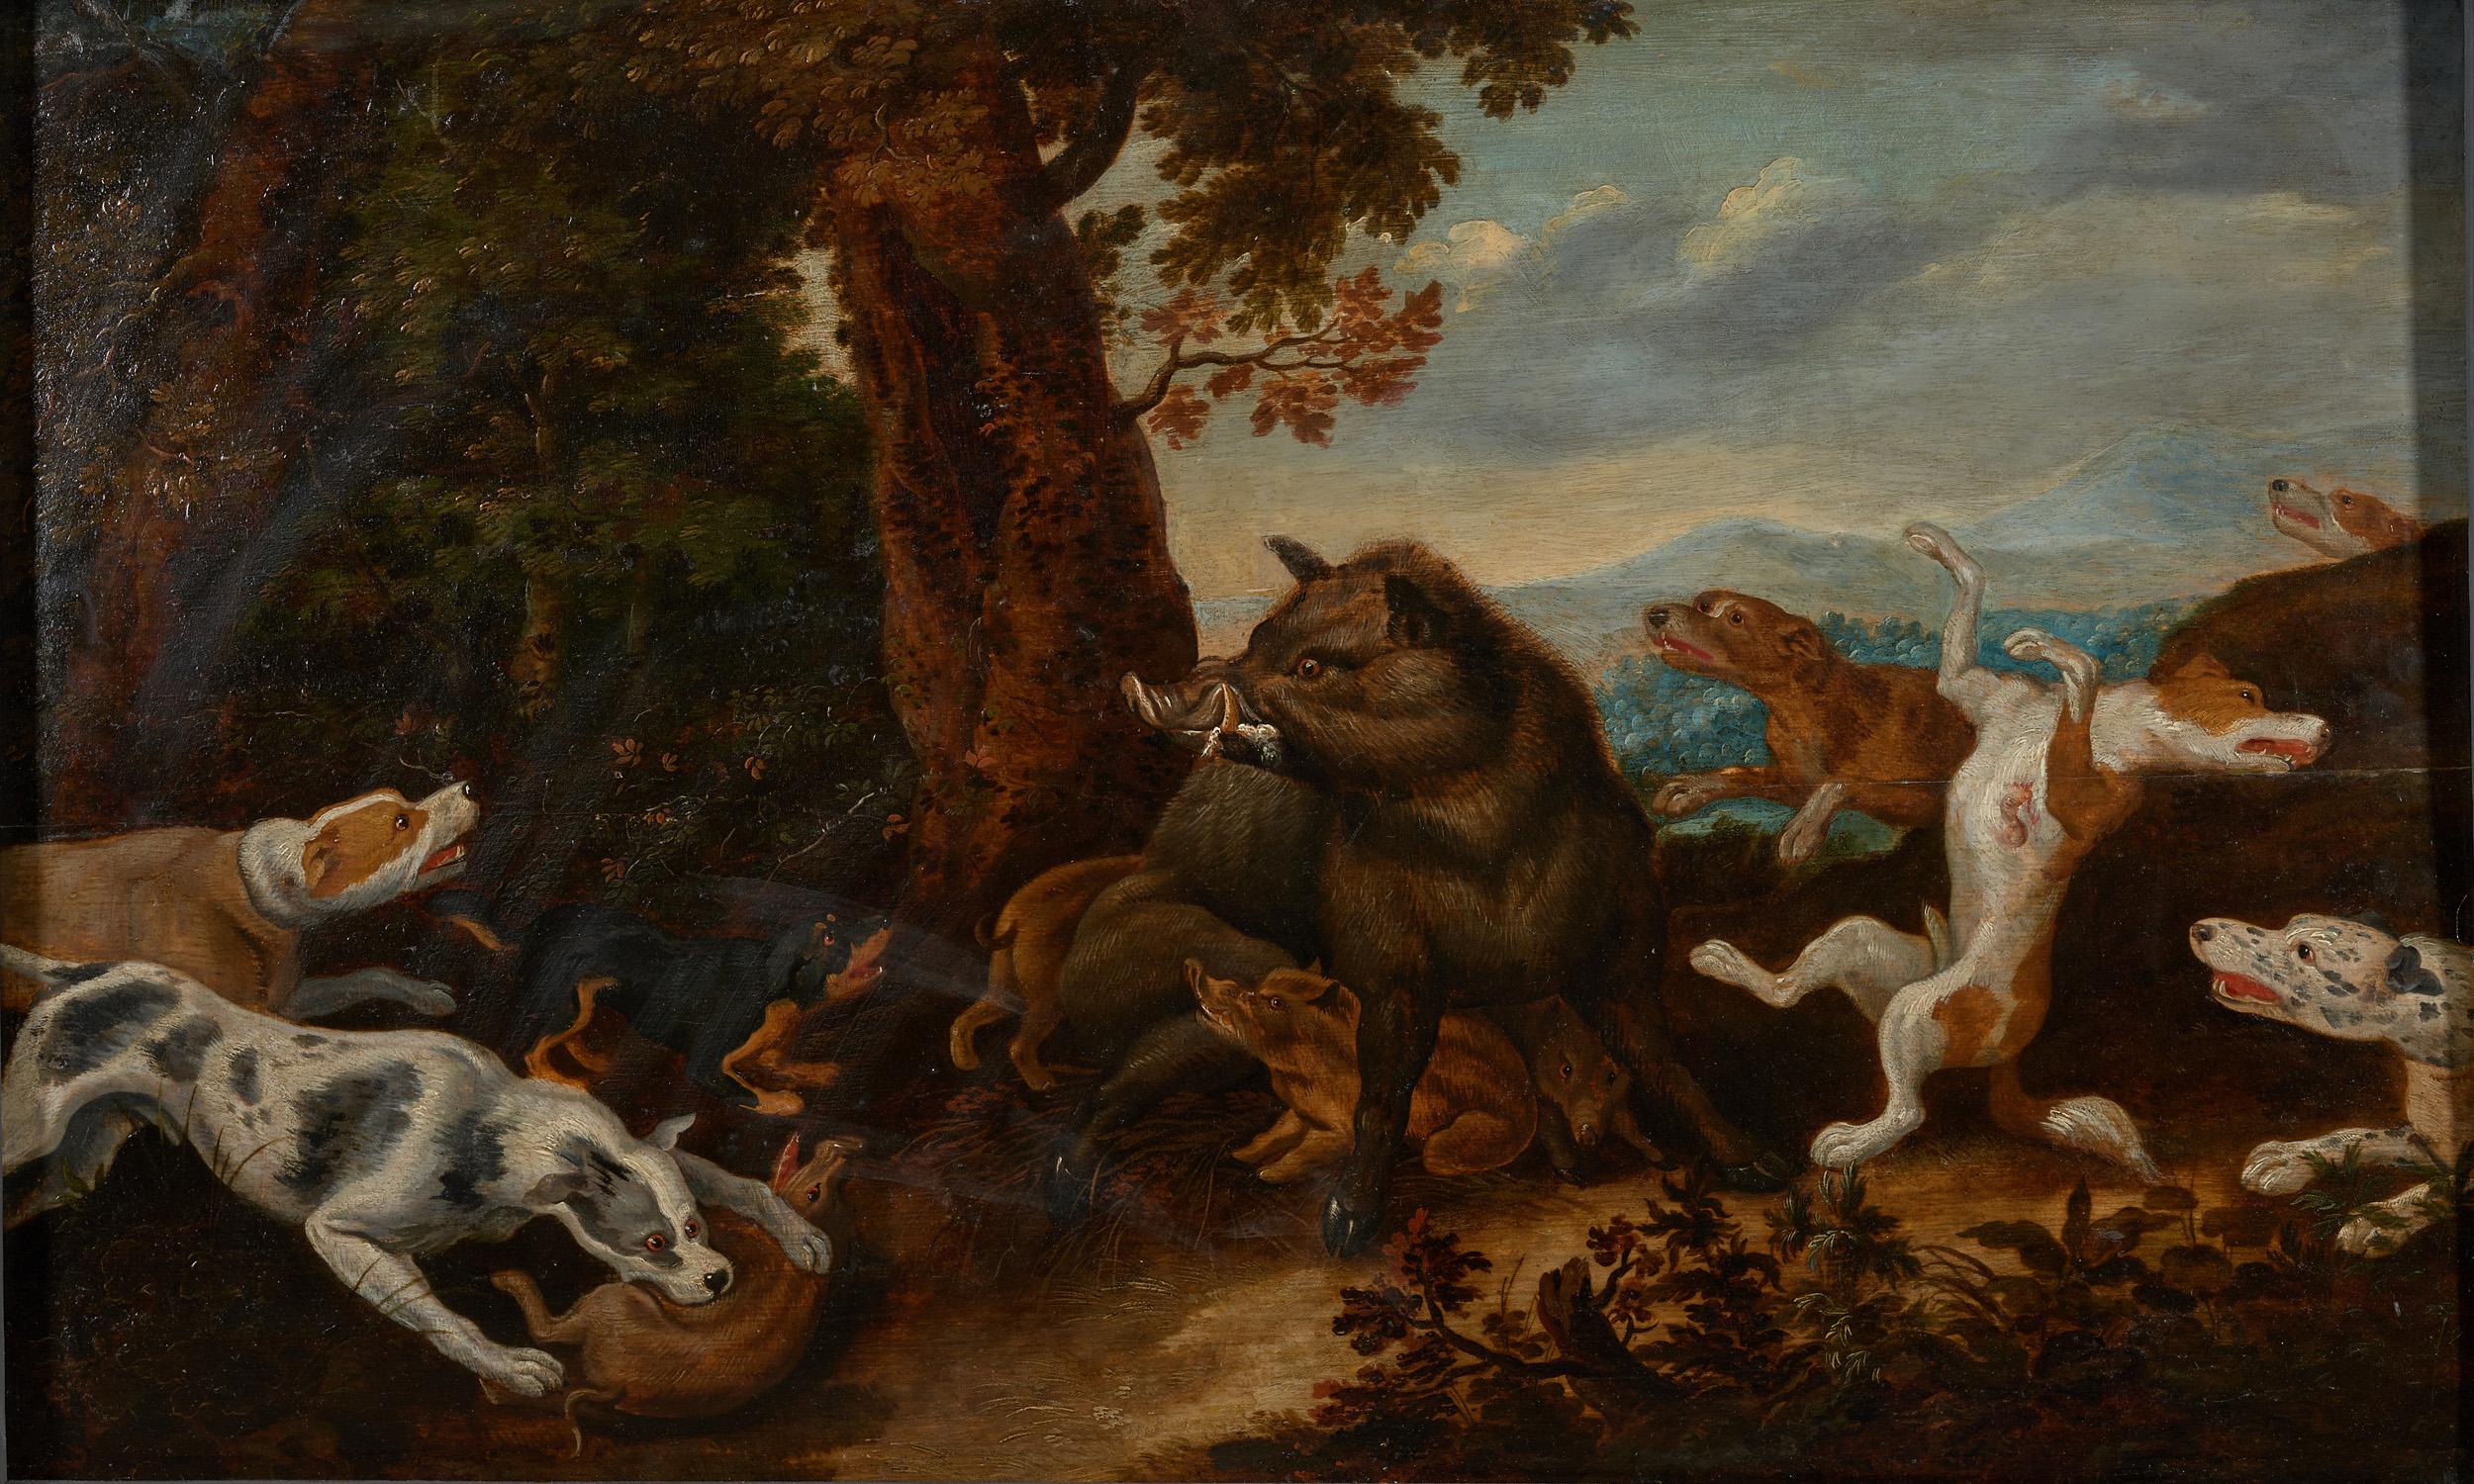 17th century Flemish Shool Antwerp, wild boar hunt in the style of Frans Snijders, oil on oak panel marked by Guilliam Gabron 1609-1662, Antwerp. The style of this painting is very close to the Antwerp born painters Frans Snijders (1579-1657) and